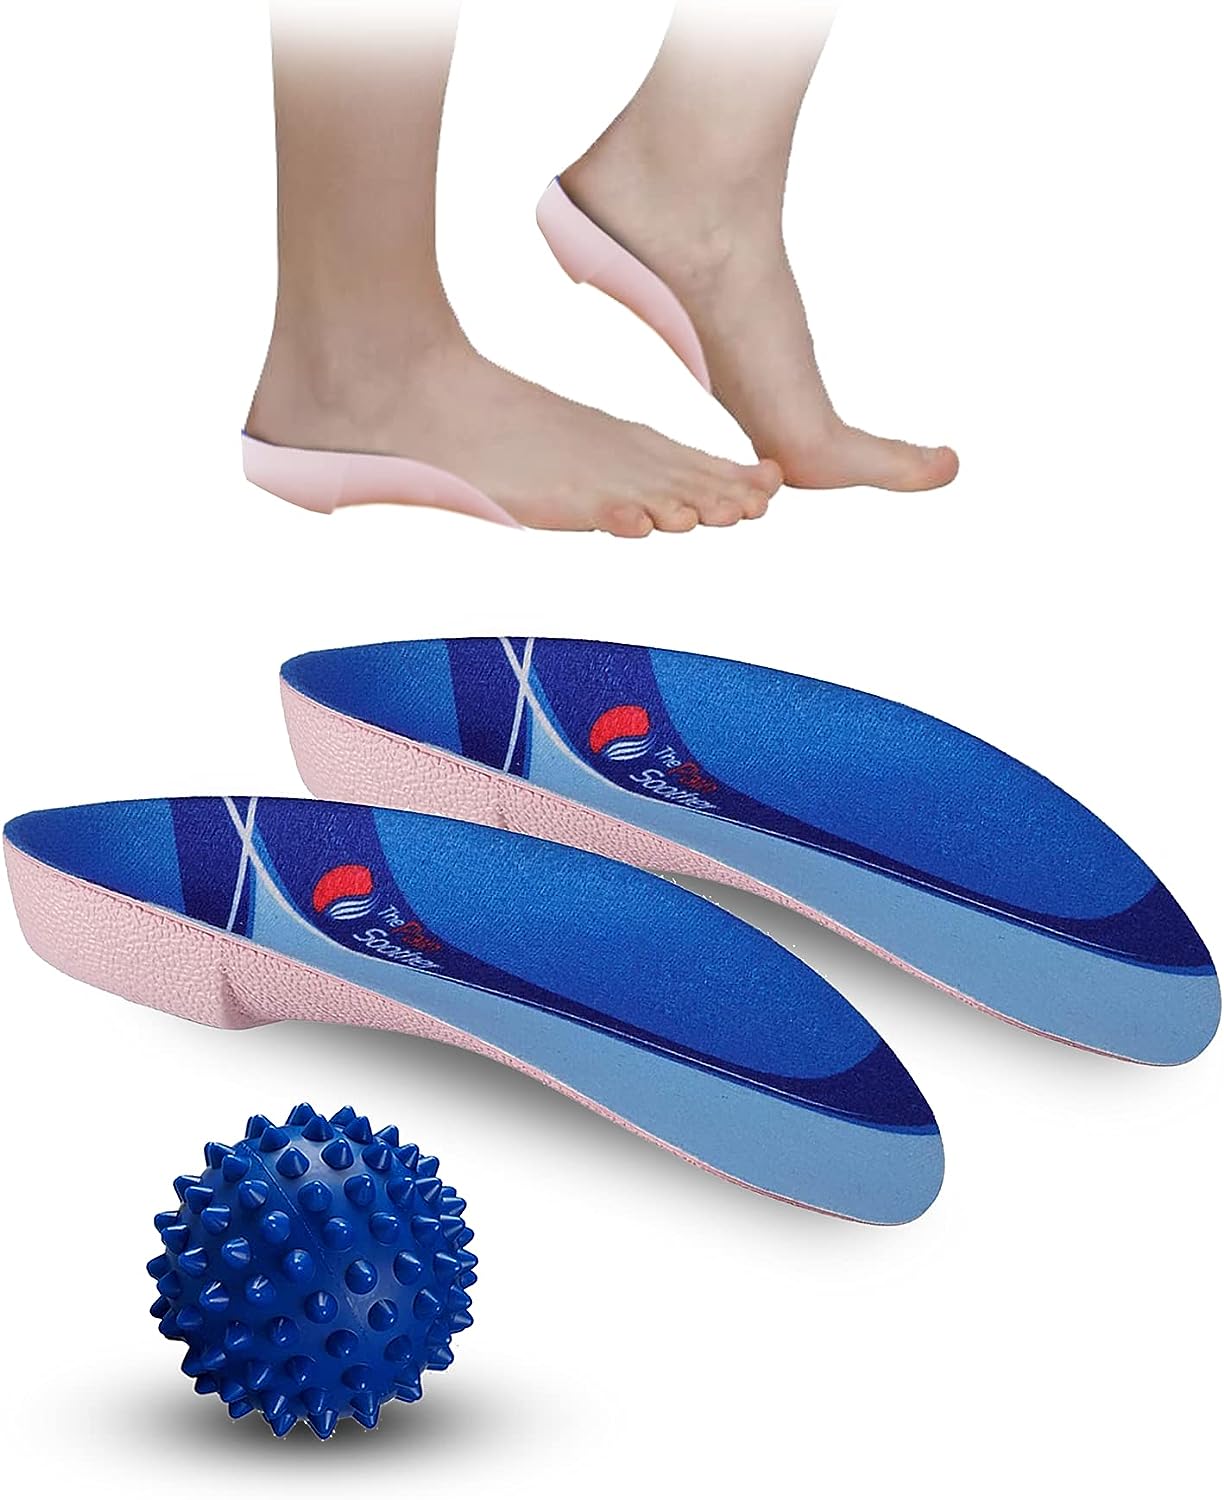 Shoe Inserts for Plantar Fasciitis - Strong High Arch [...]